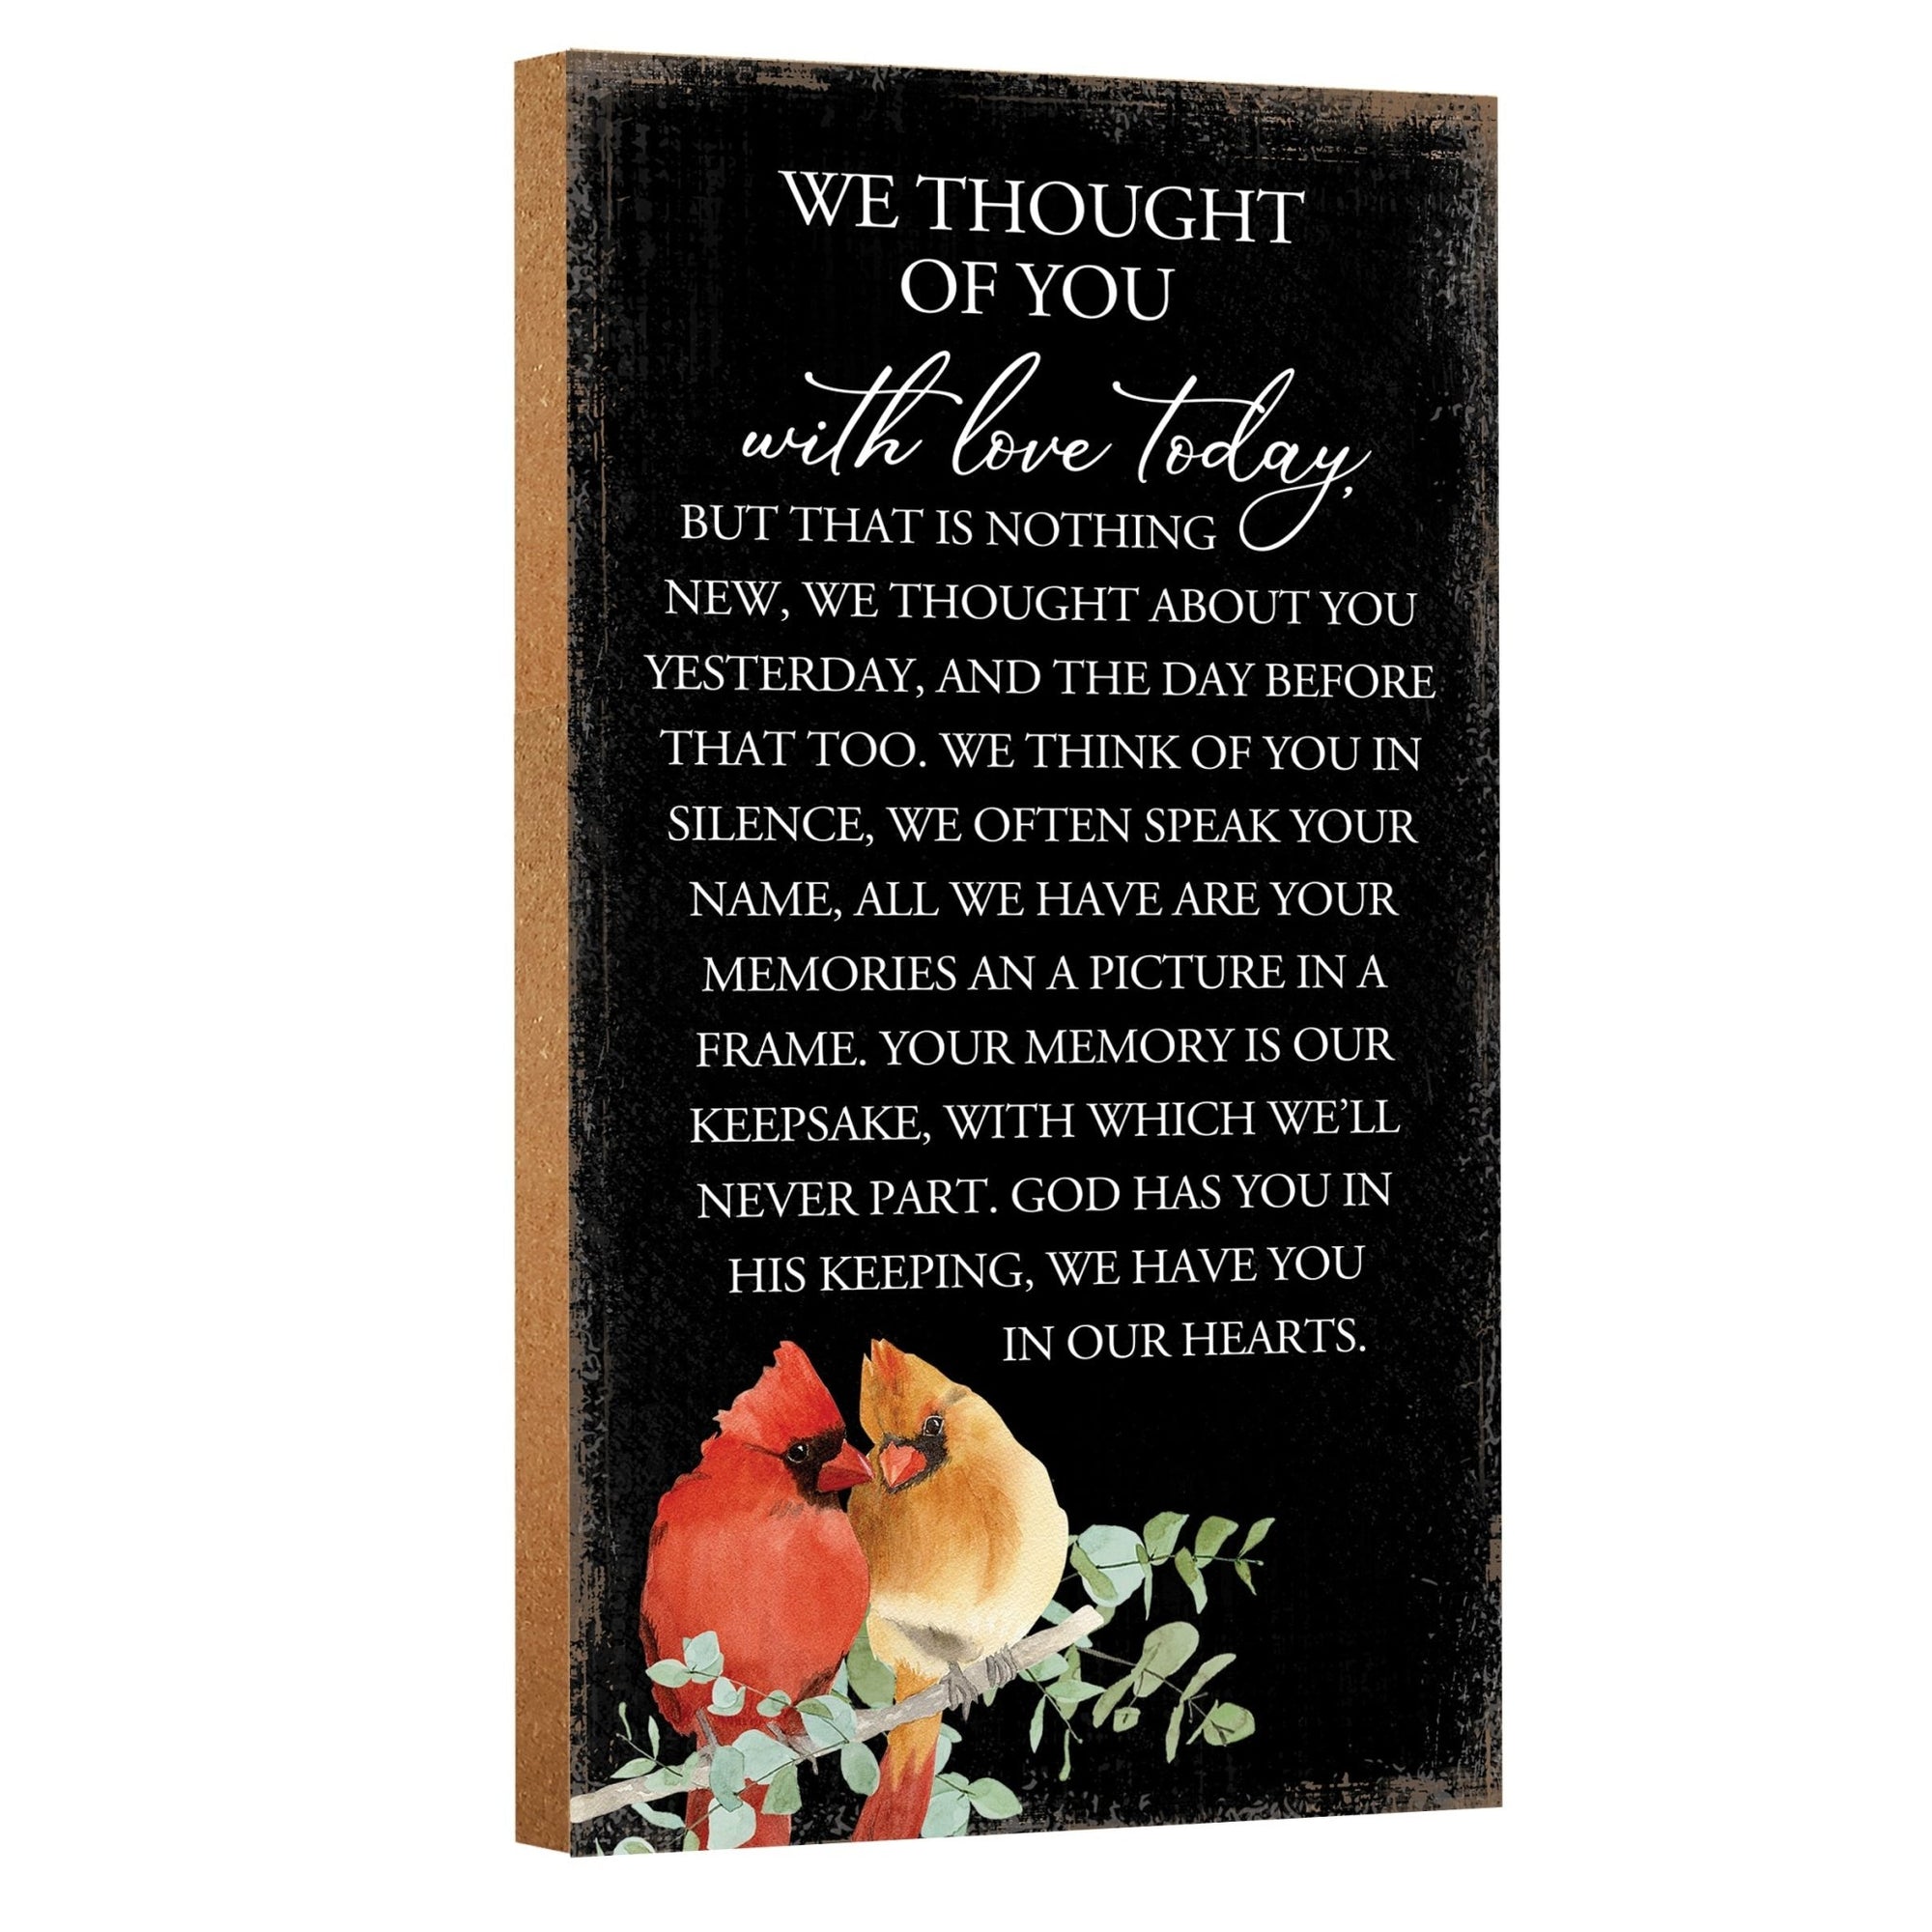 Memorial gifts for the loss of a loved one: A meaningful wooden plaque with a cardinal motif.